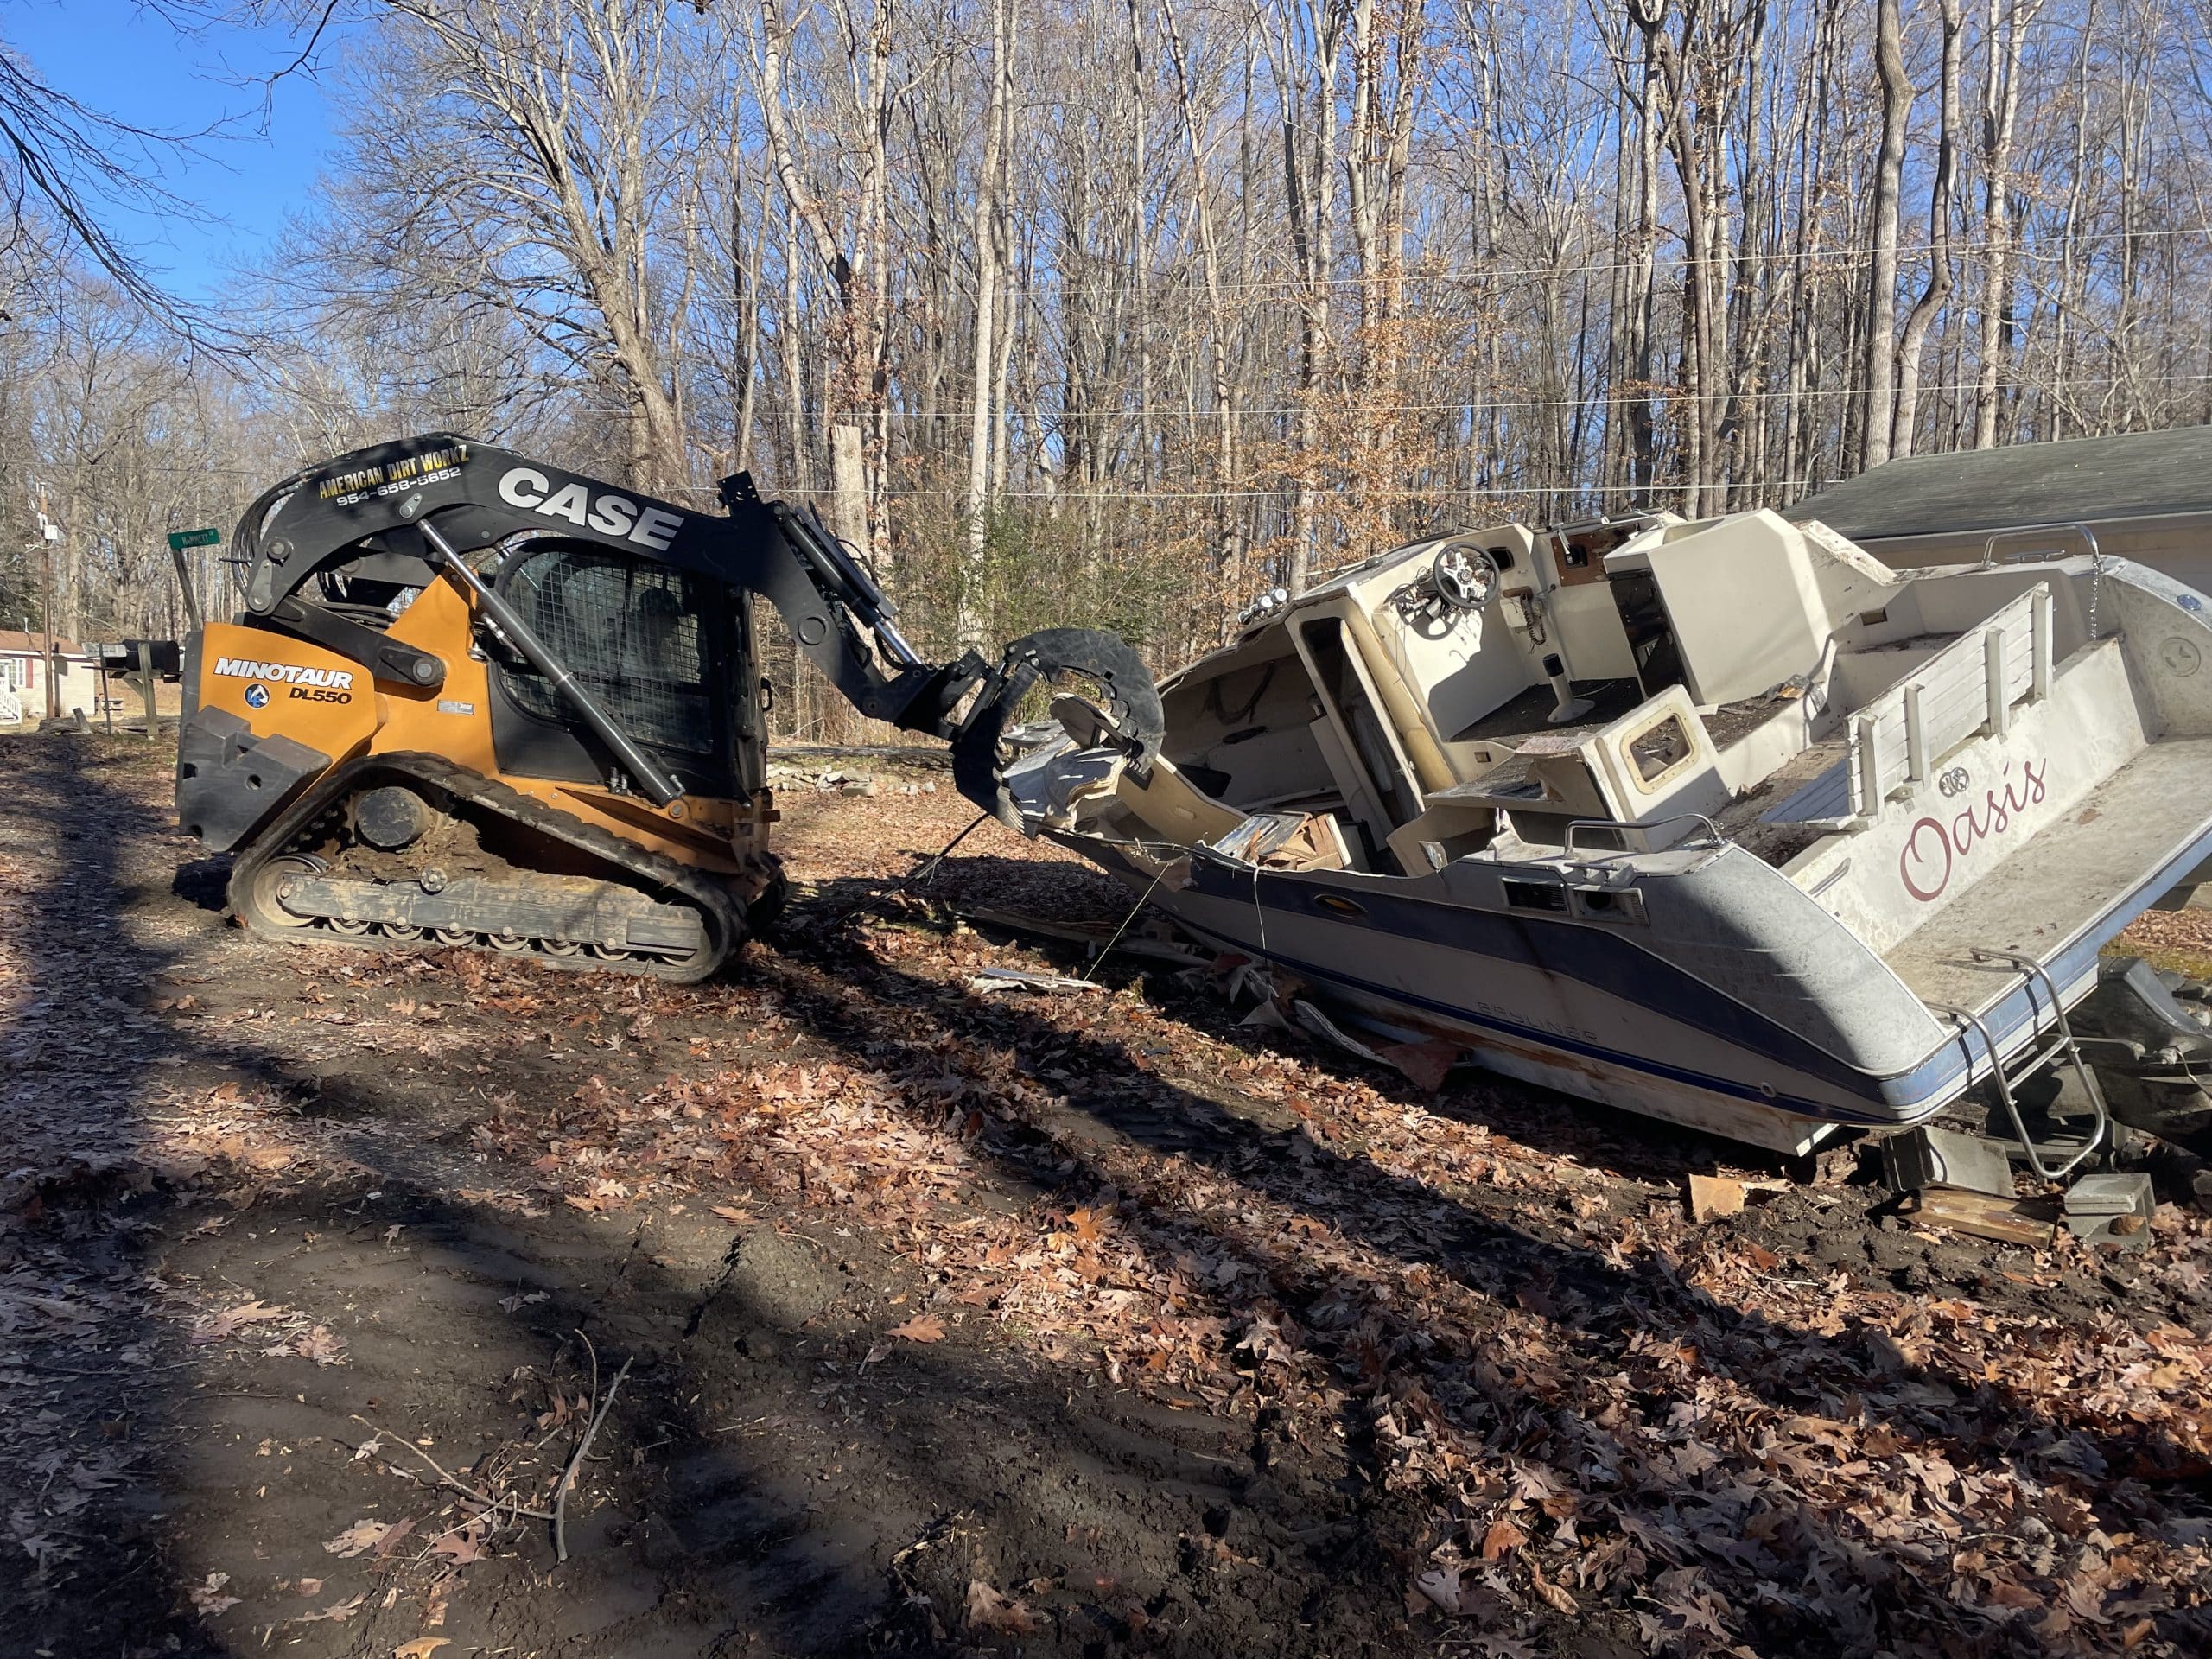 Boat removal and disposal with skid steer and dump truck